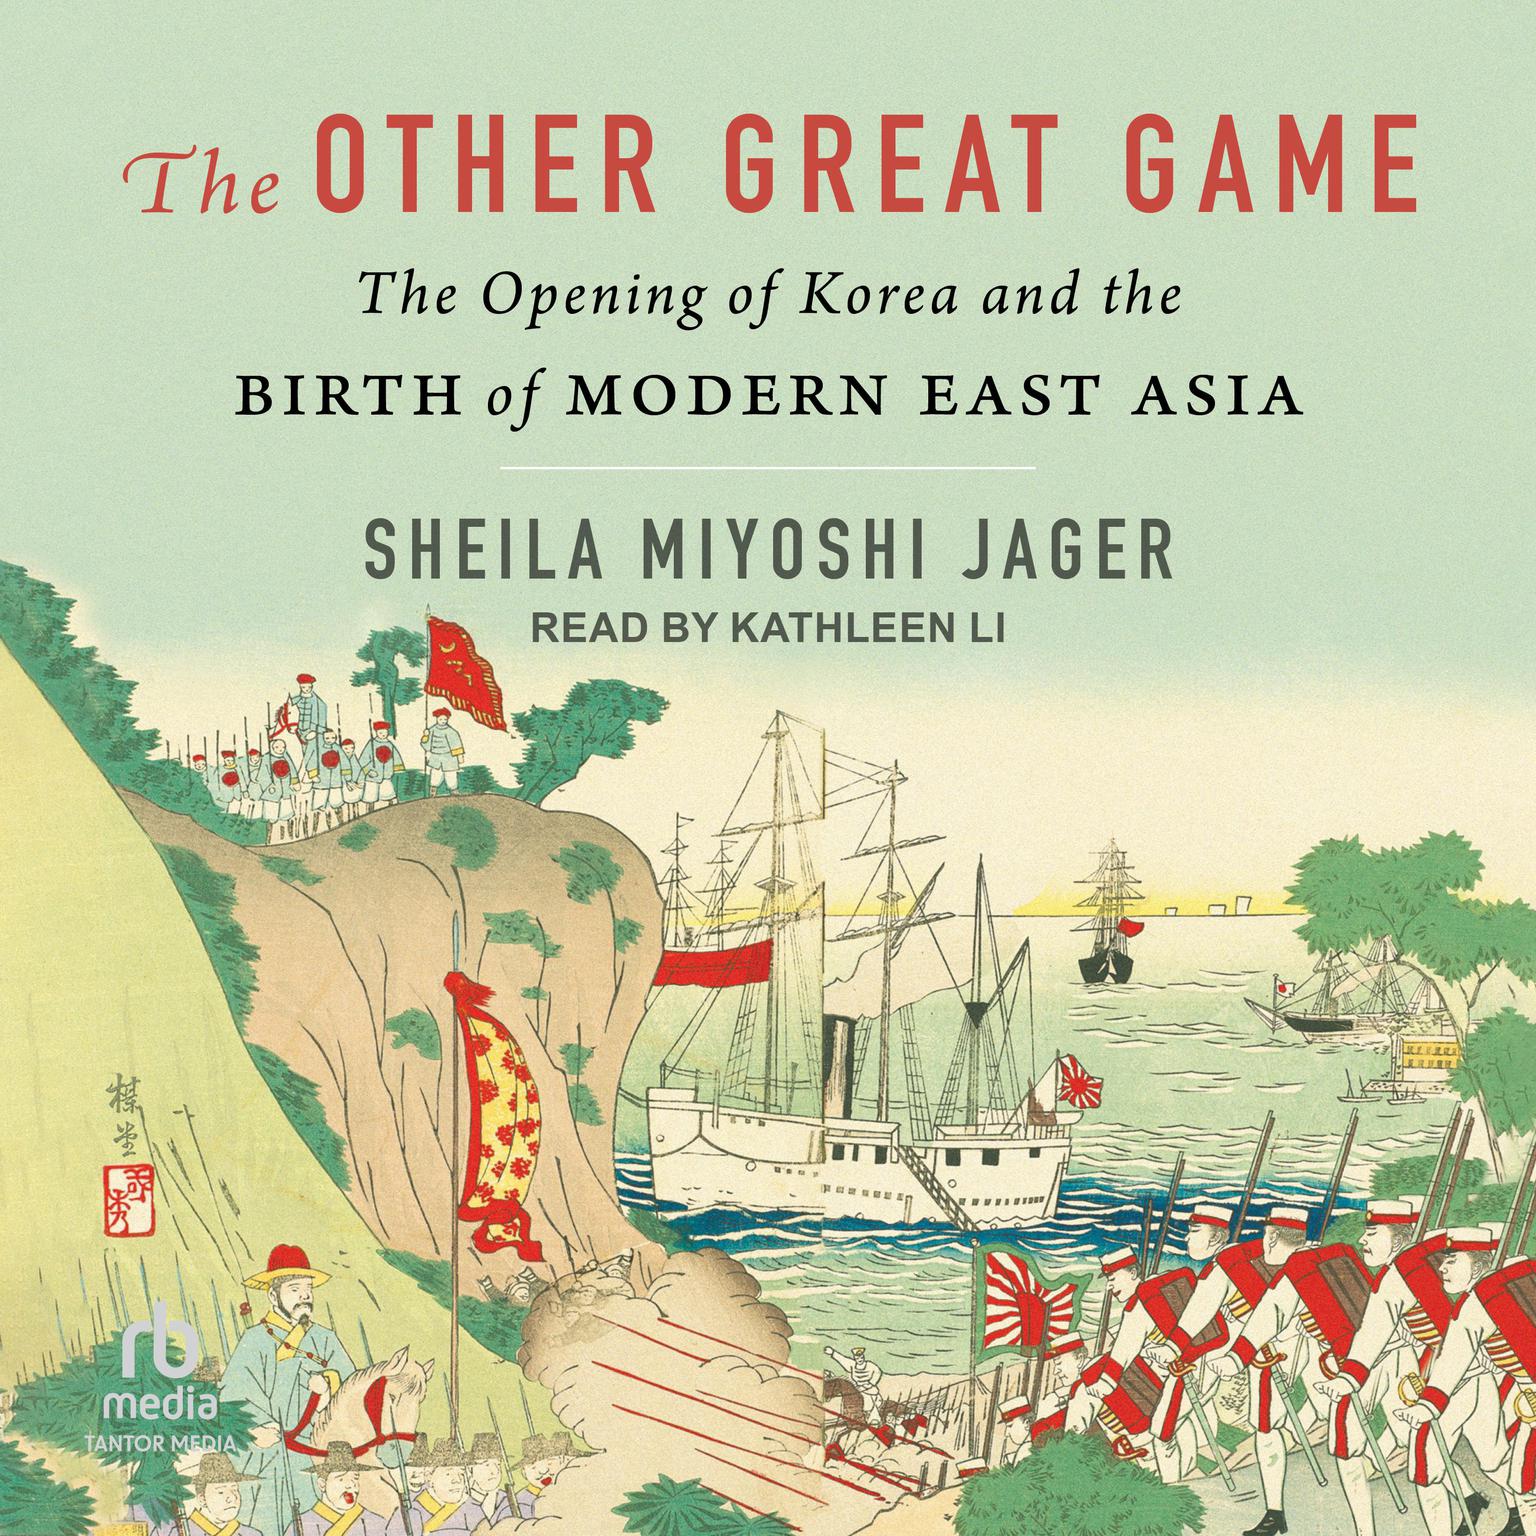 The Other Great Game: The Opening of Korea and the Birth of Modern East Asia Audiobook, by Sheila Miyoshi Jager